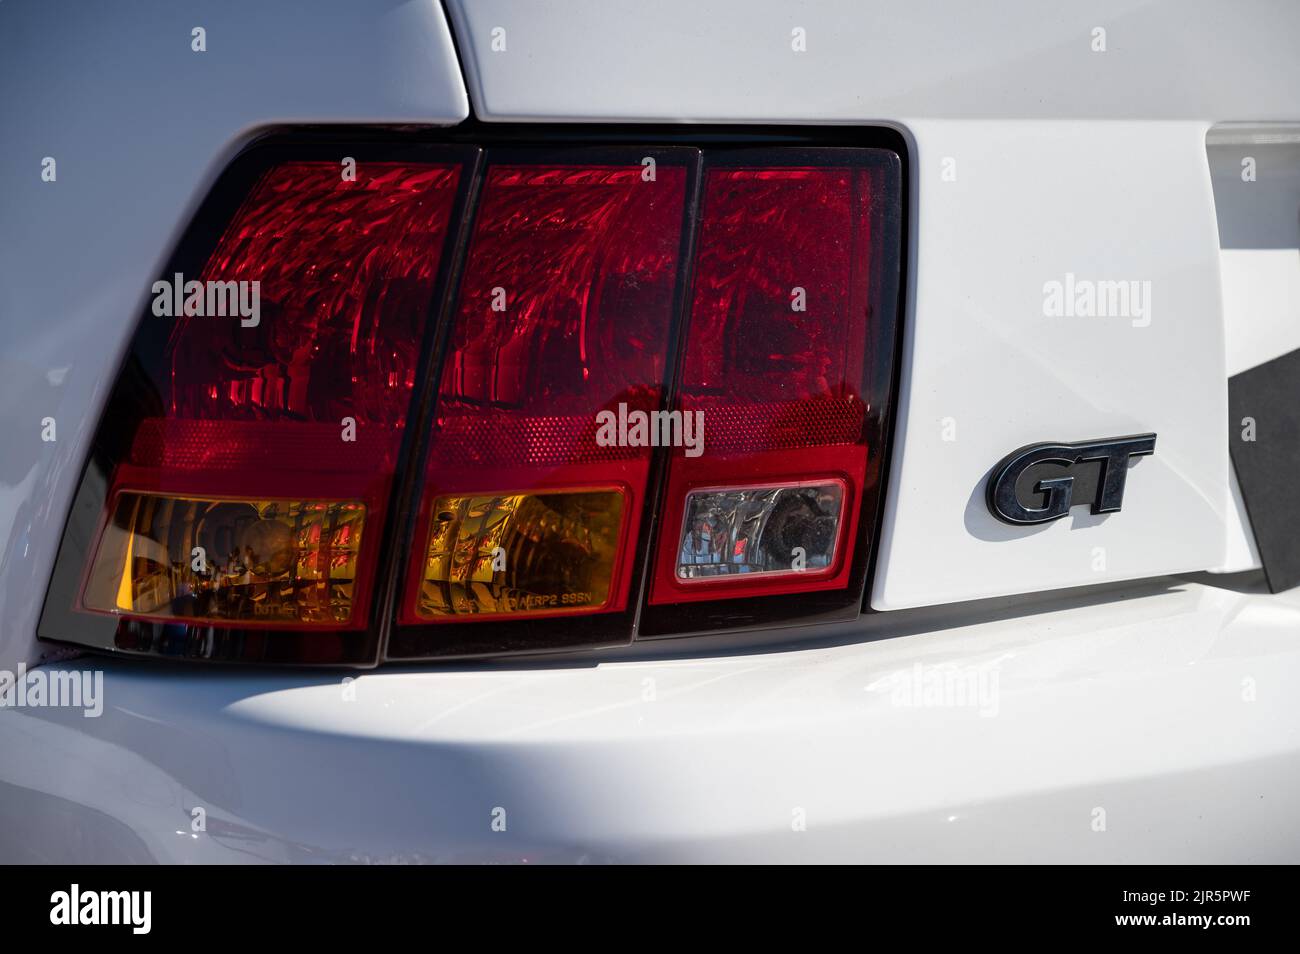 The details of the rear of a white Ford Mustang GT Stock Photo